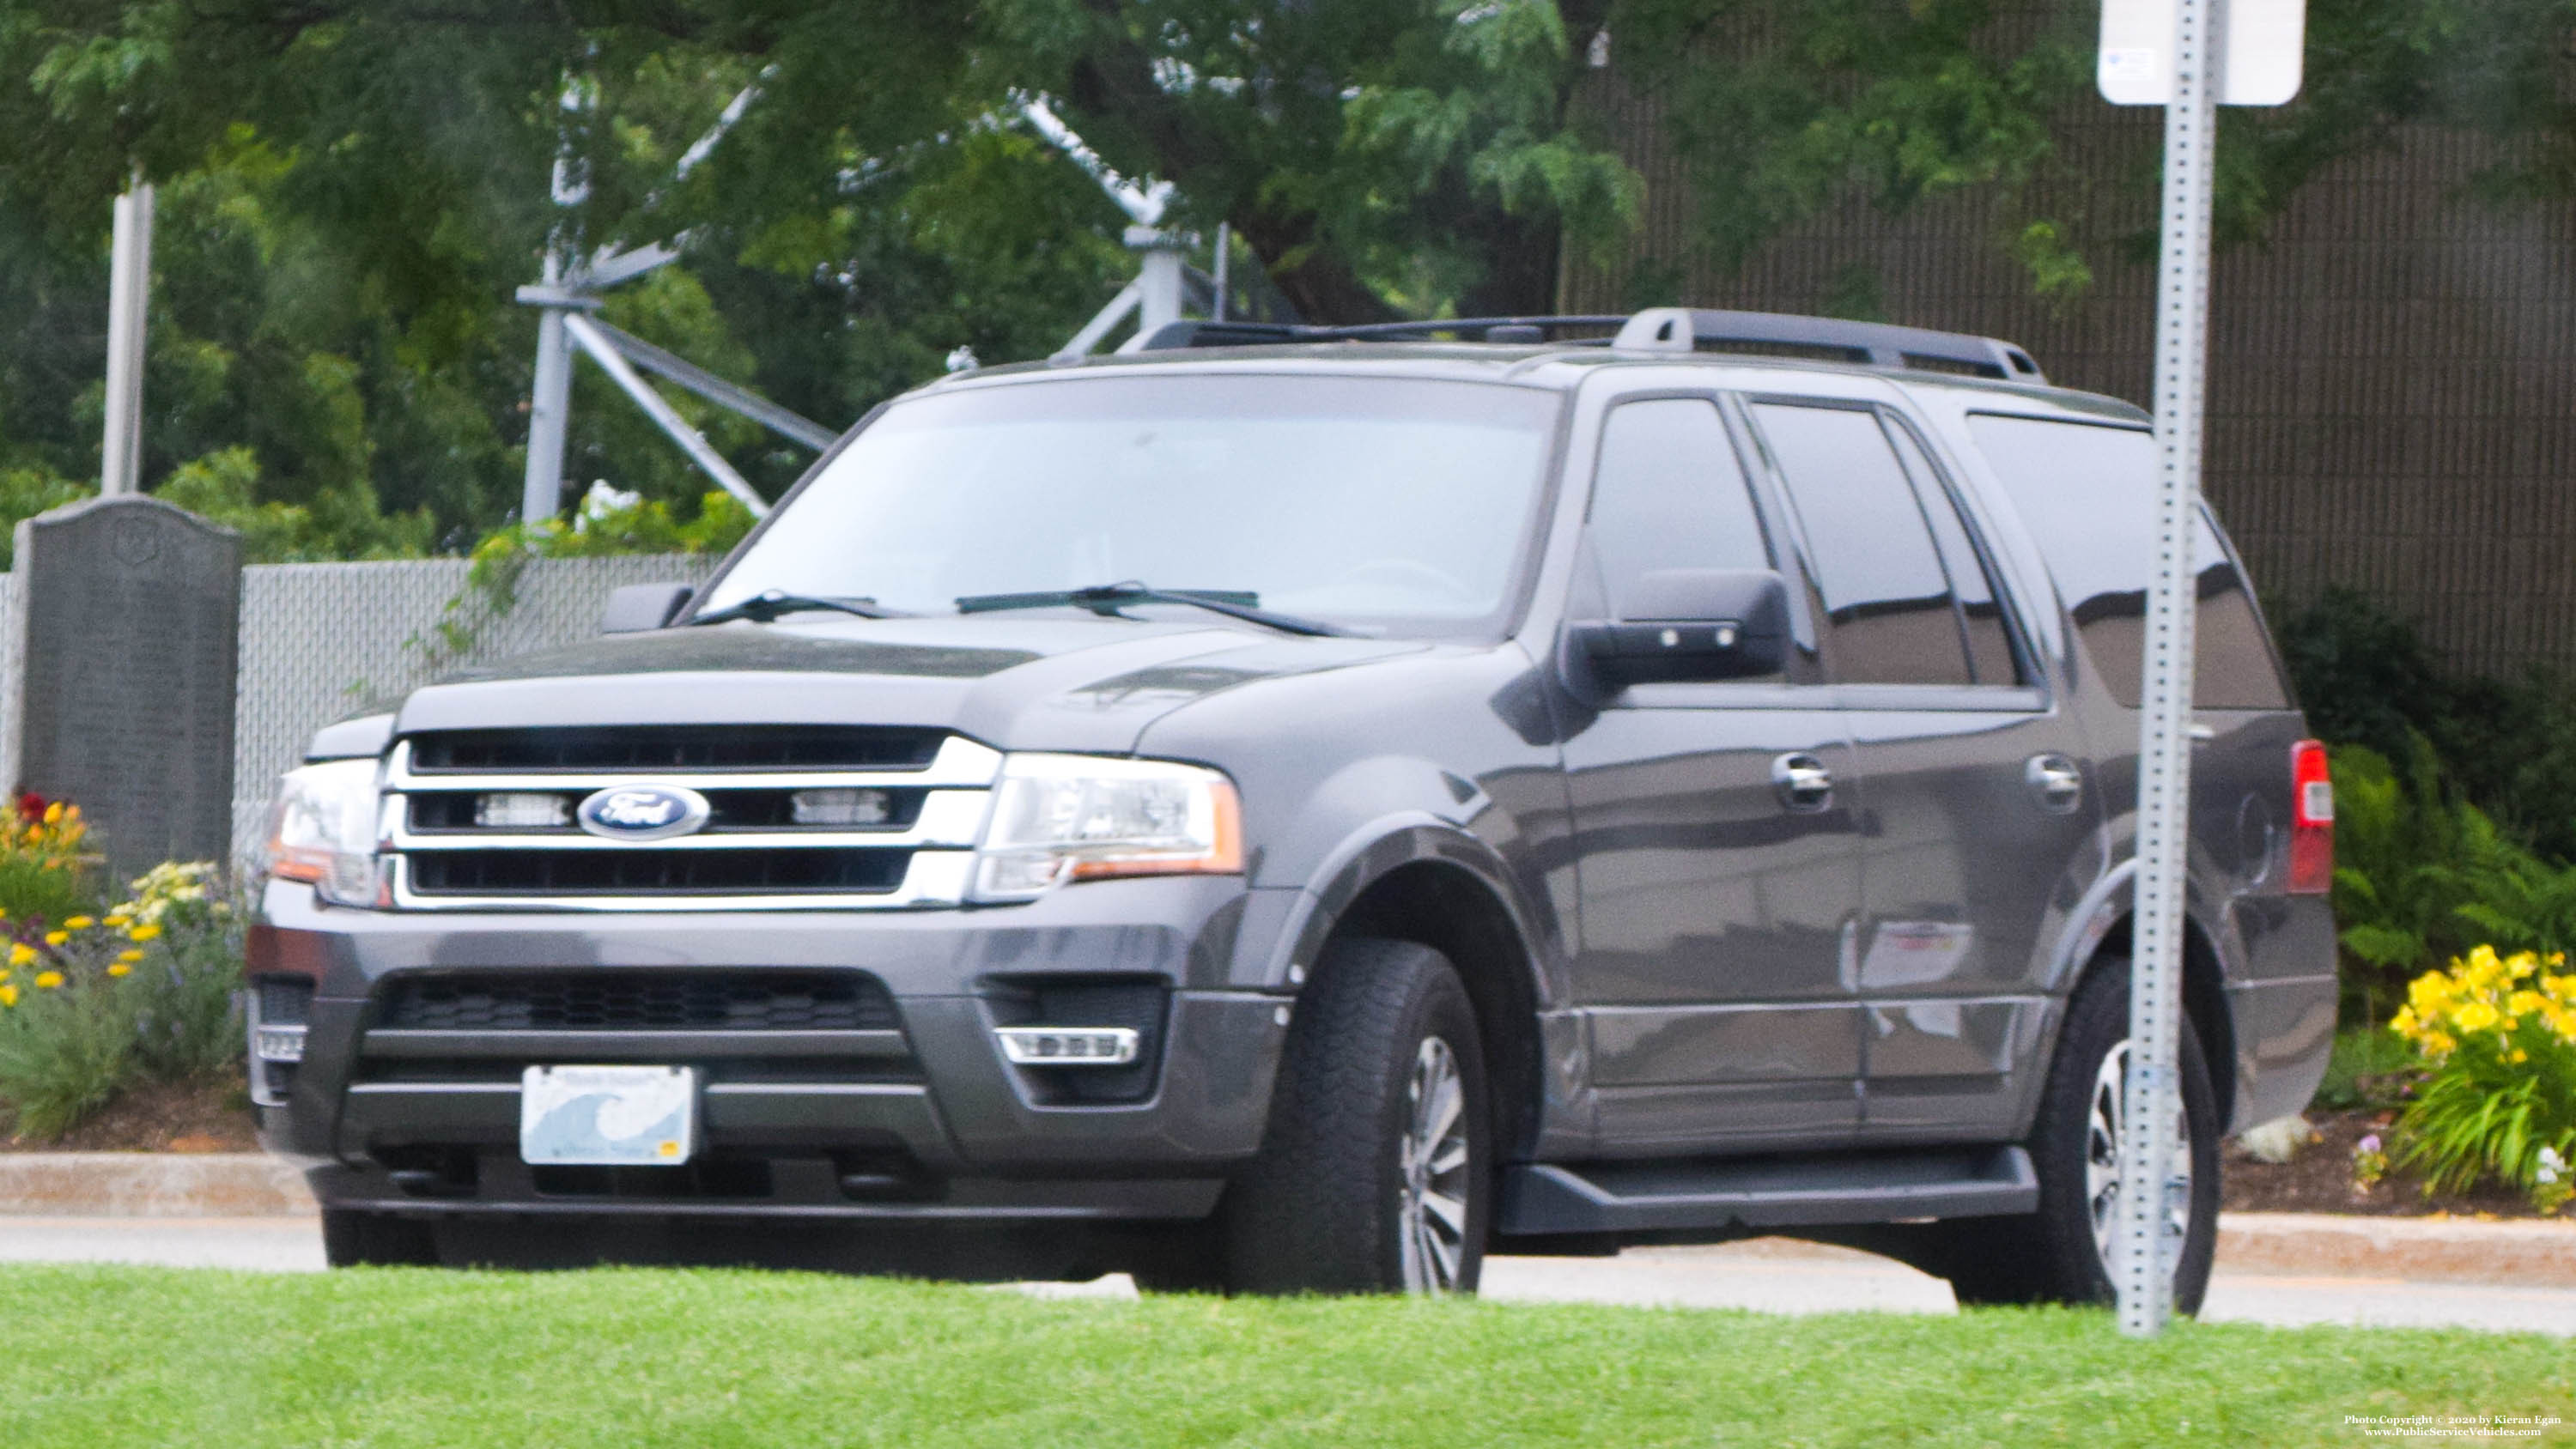 A photo  of East Providence Police
            Deputy Chief's Unit, a 2015-2019 Ford Expedition             taken by Kieran Egan